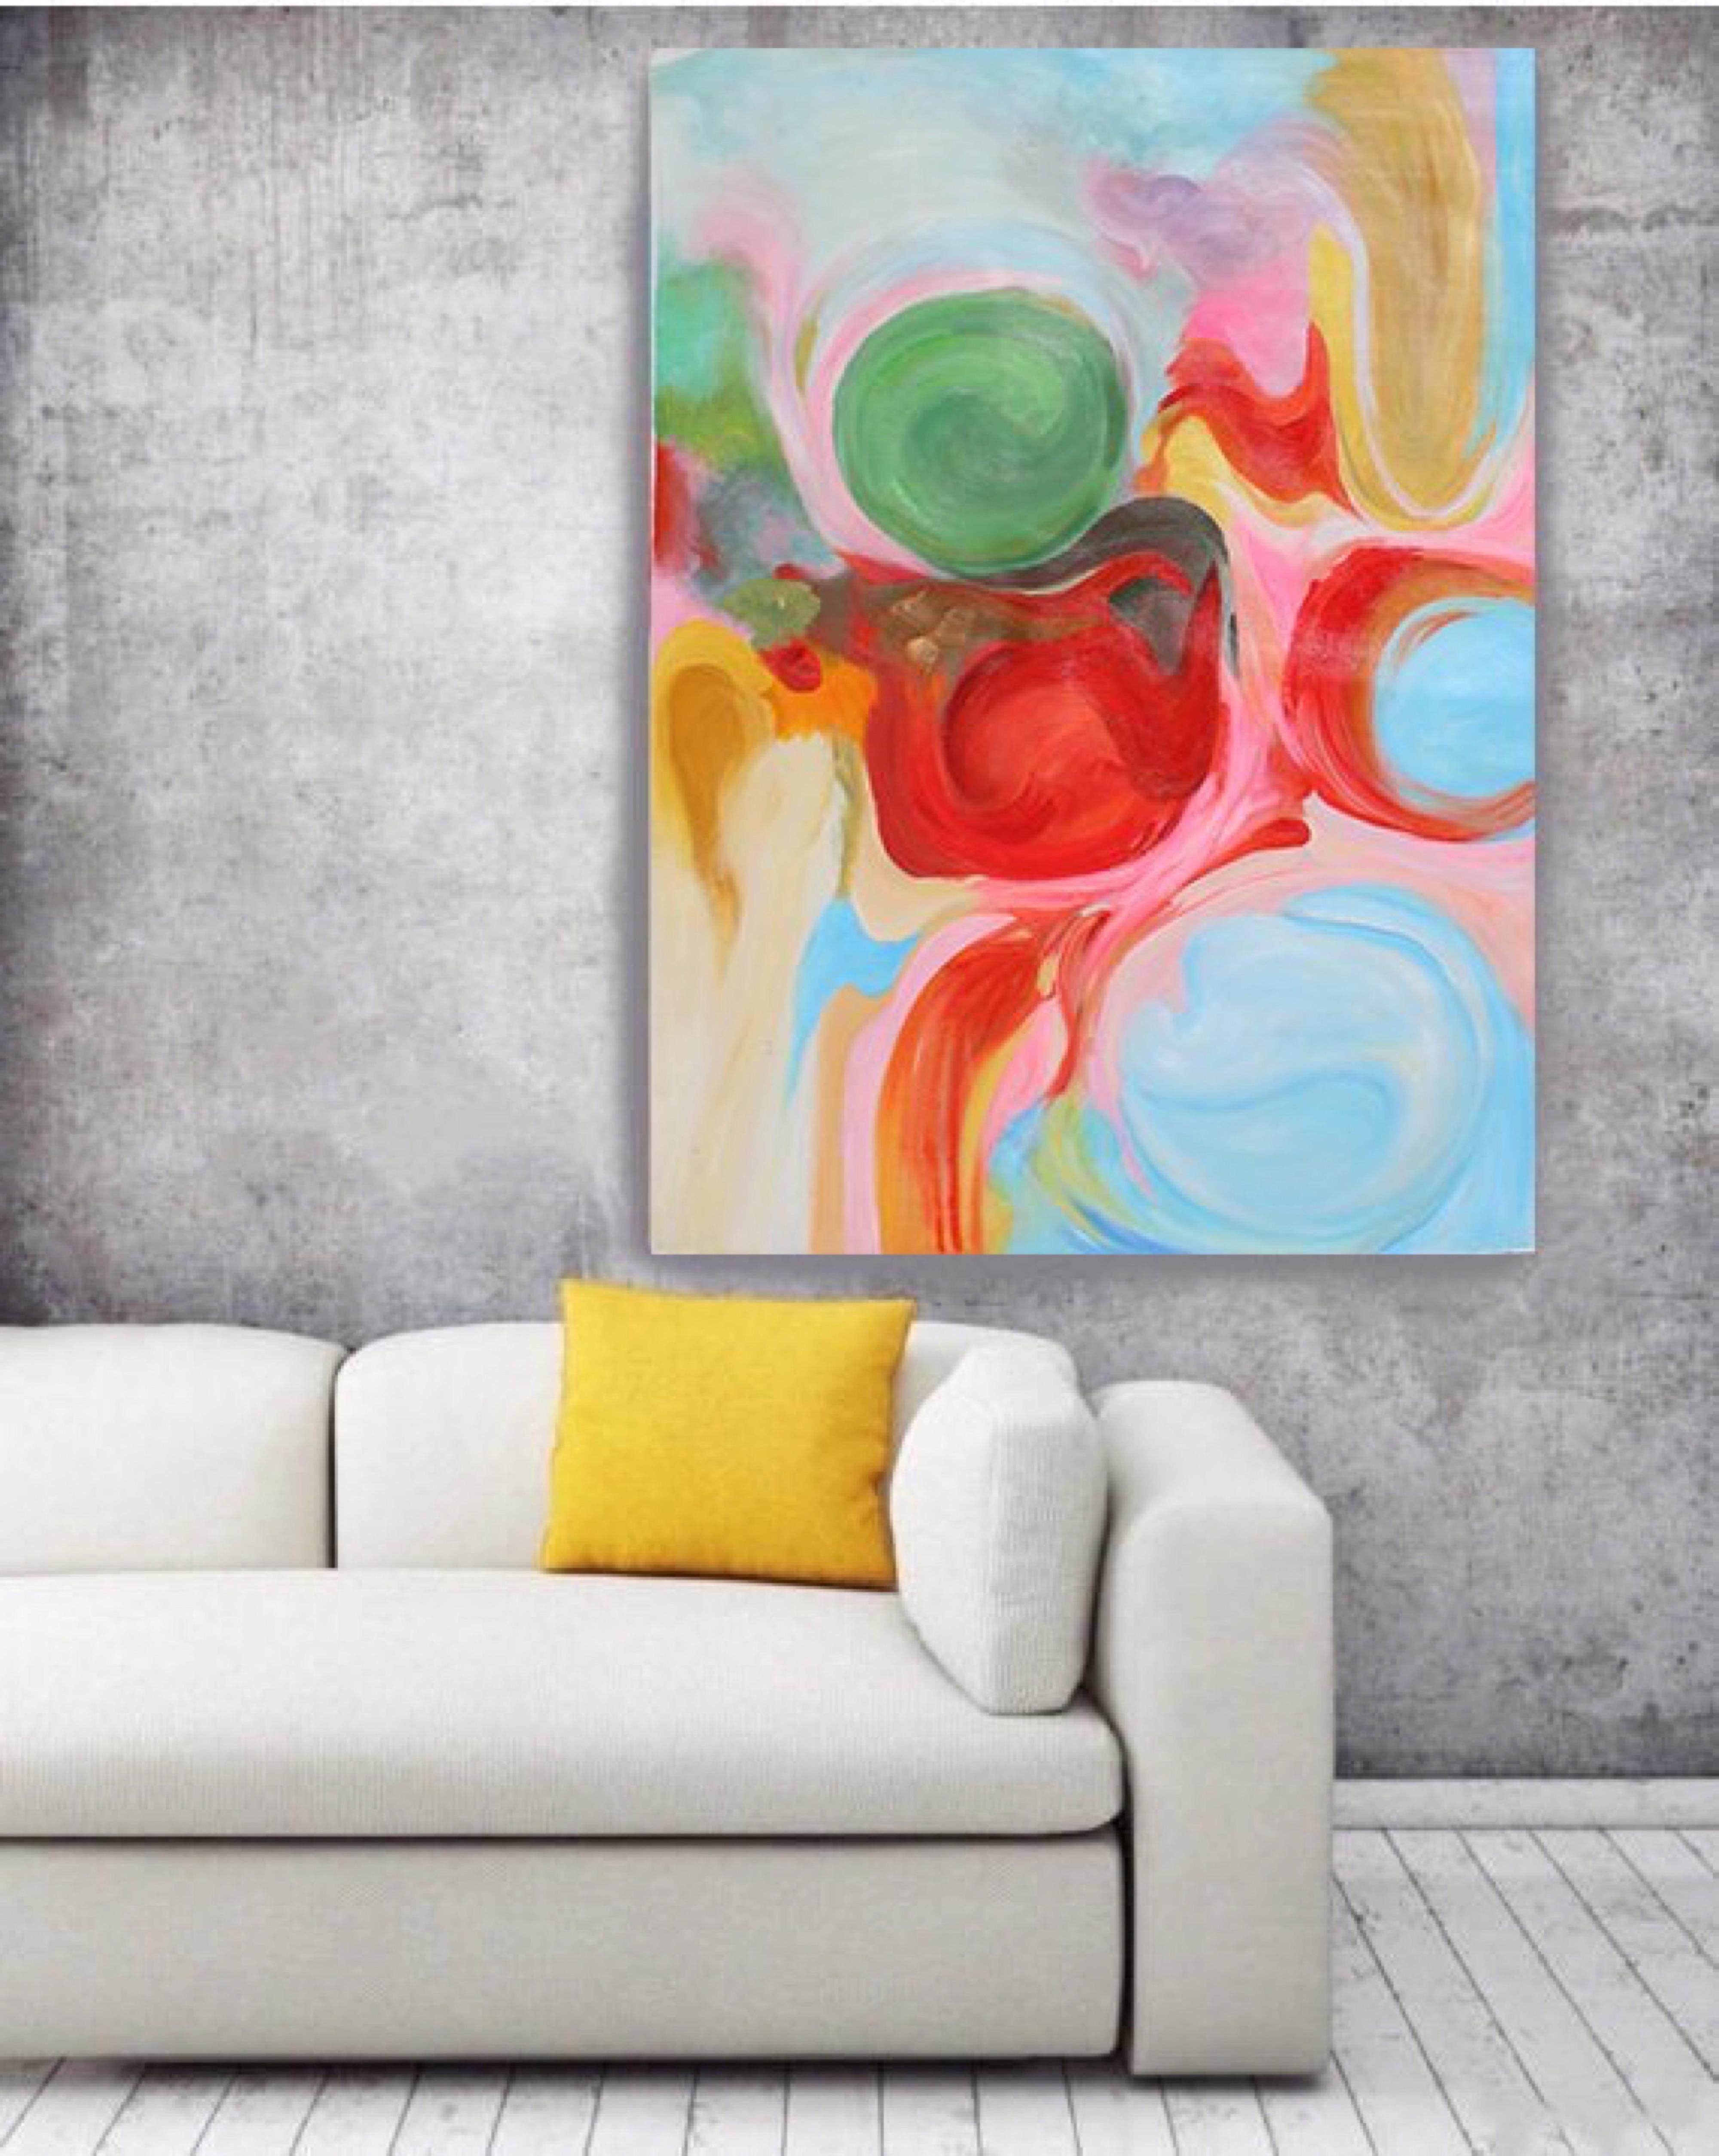 Contemporary Abstract Flow Colorful Oil Painting 72H X 48"W, Vivid Dreams